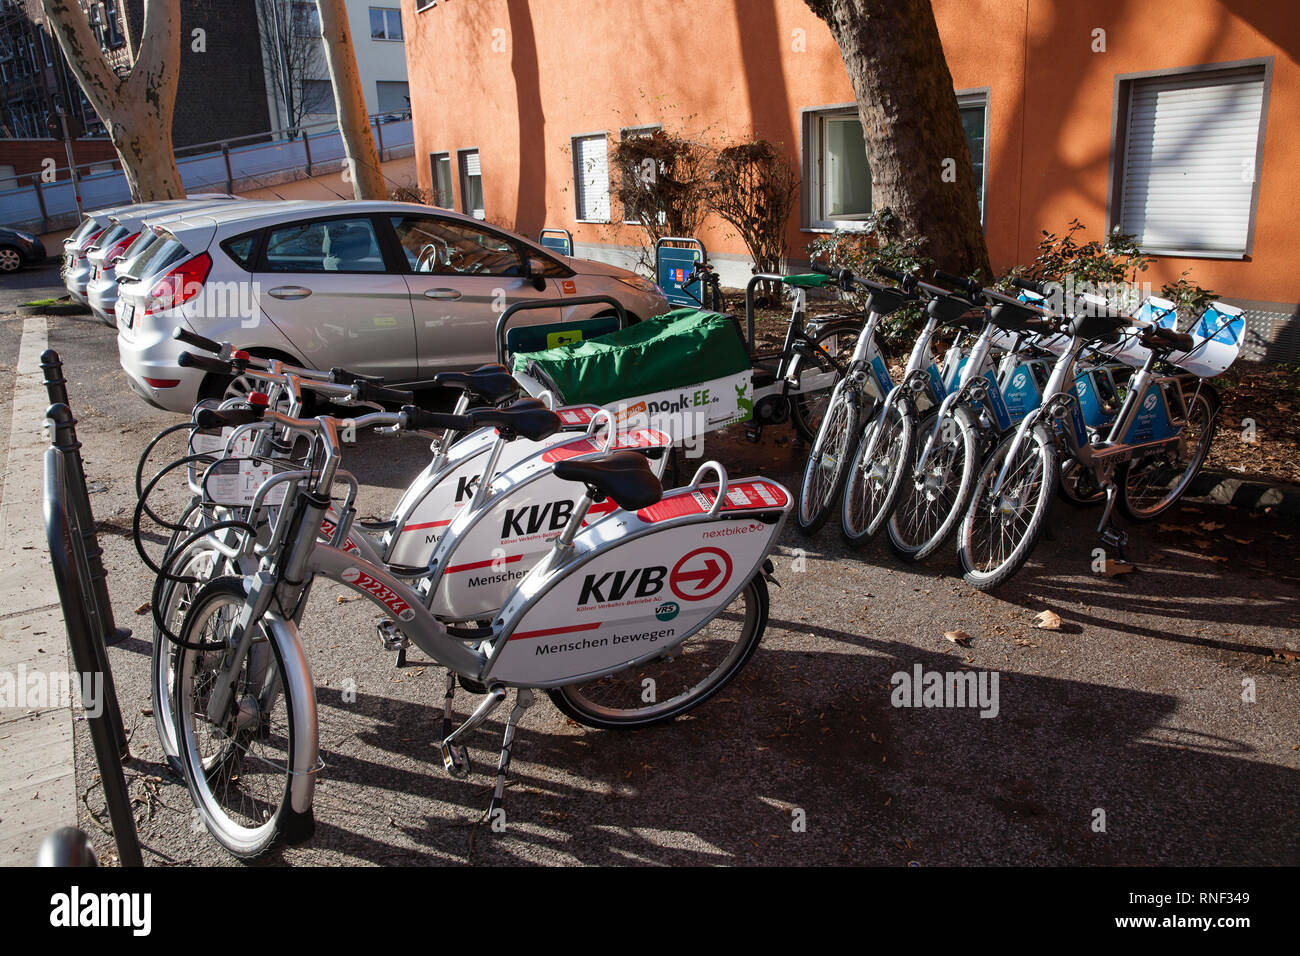 Mobilstation on Josephstreet in the Severins district, Cologne, Germany. The station offers carsharing, bikesharing, cargo bike sharing and bike parki Stock Photo